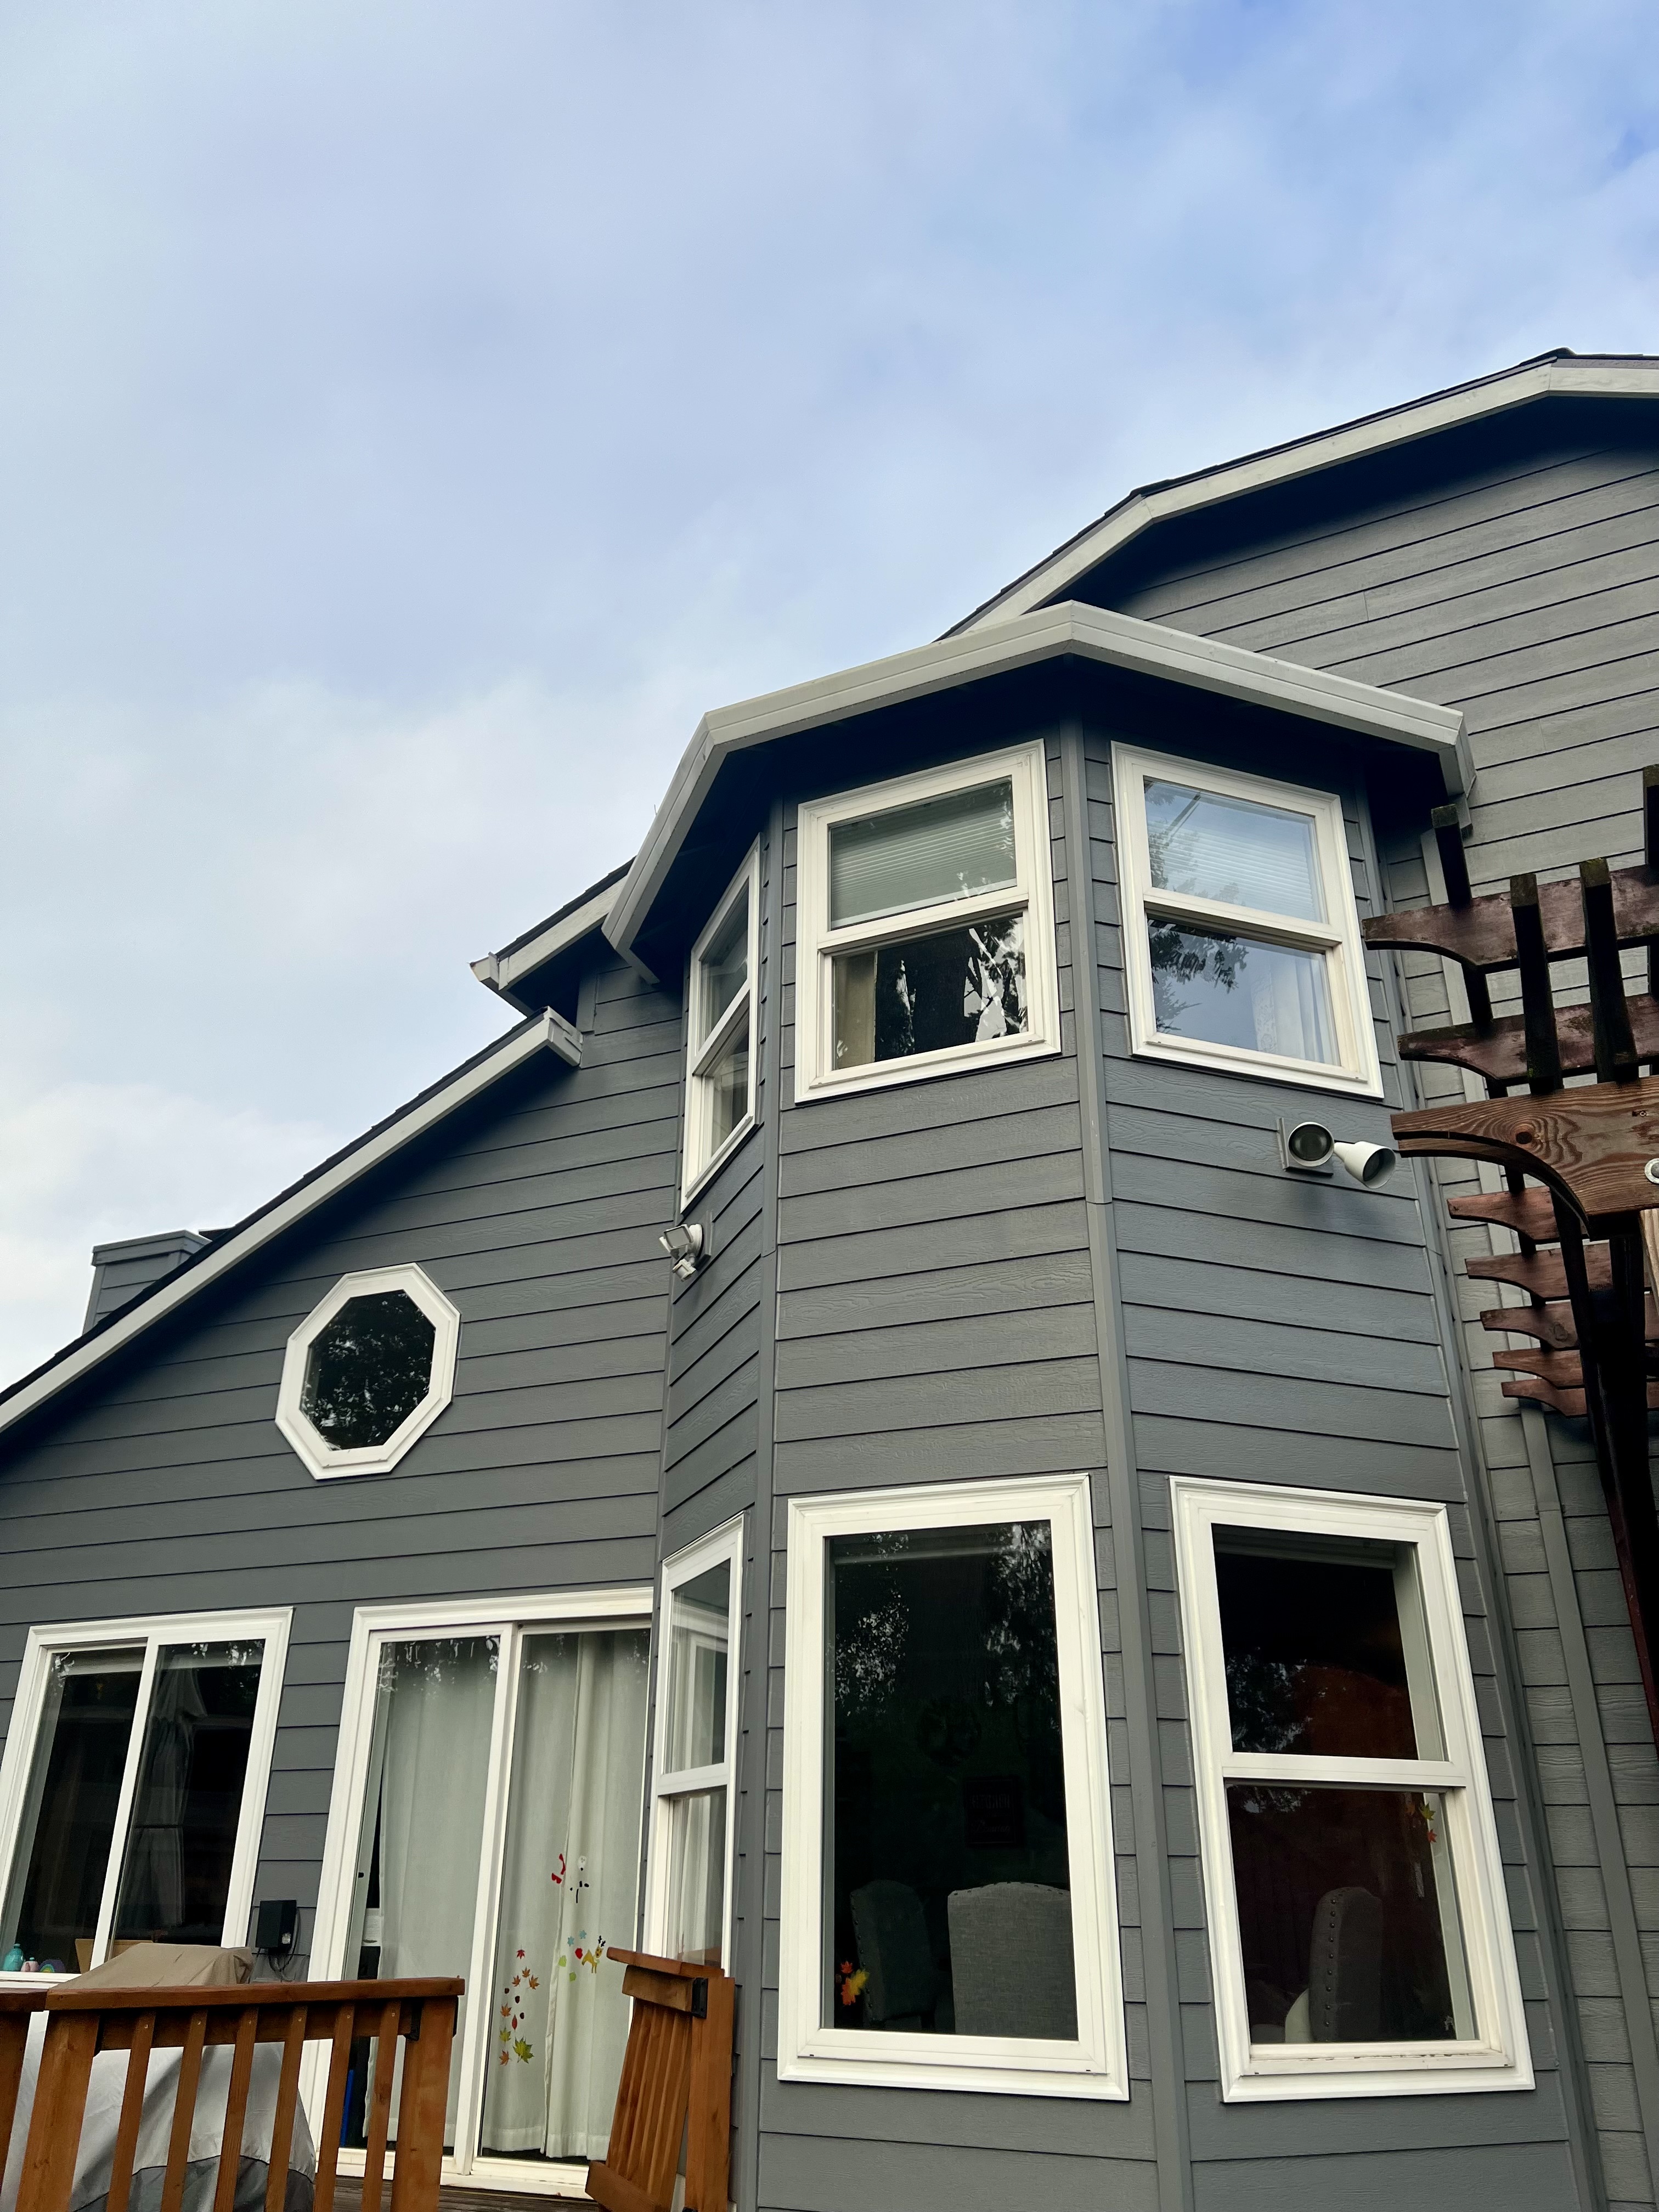 Top Notch Window and Gutter Cleaning in Milwaukie Oregon